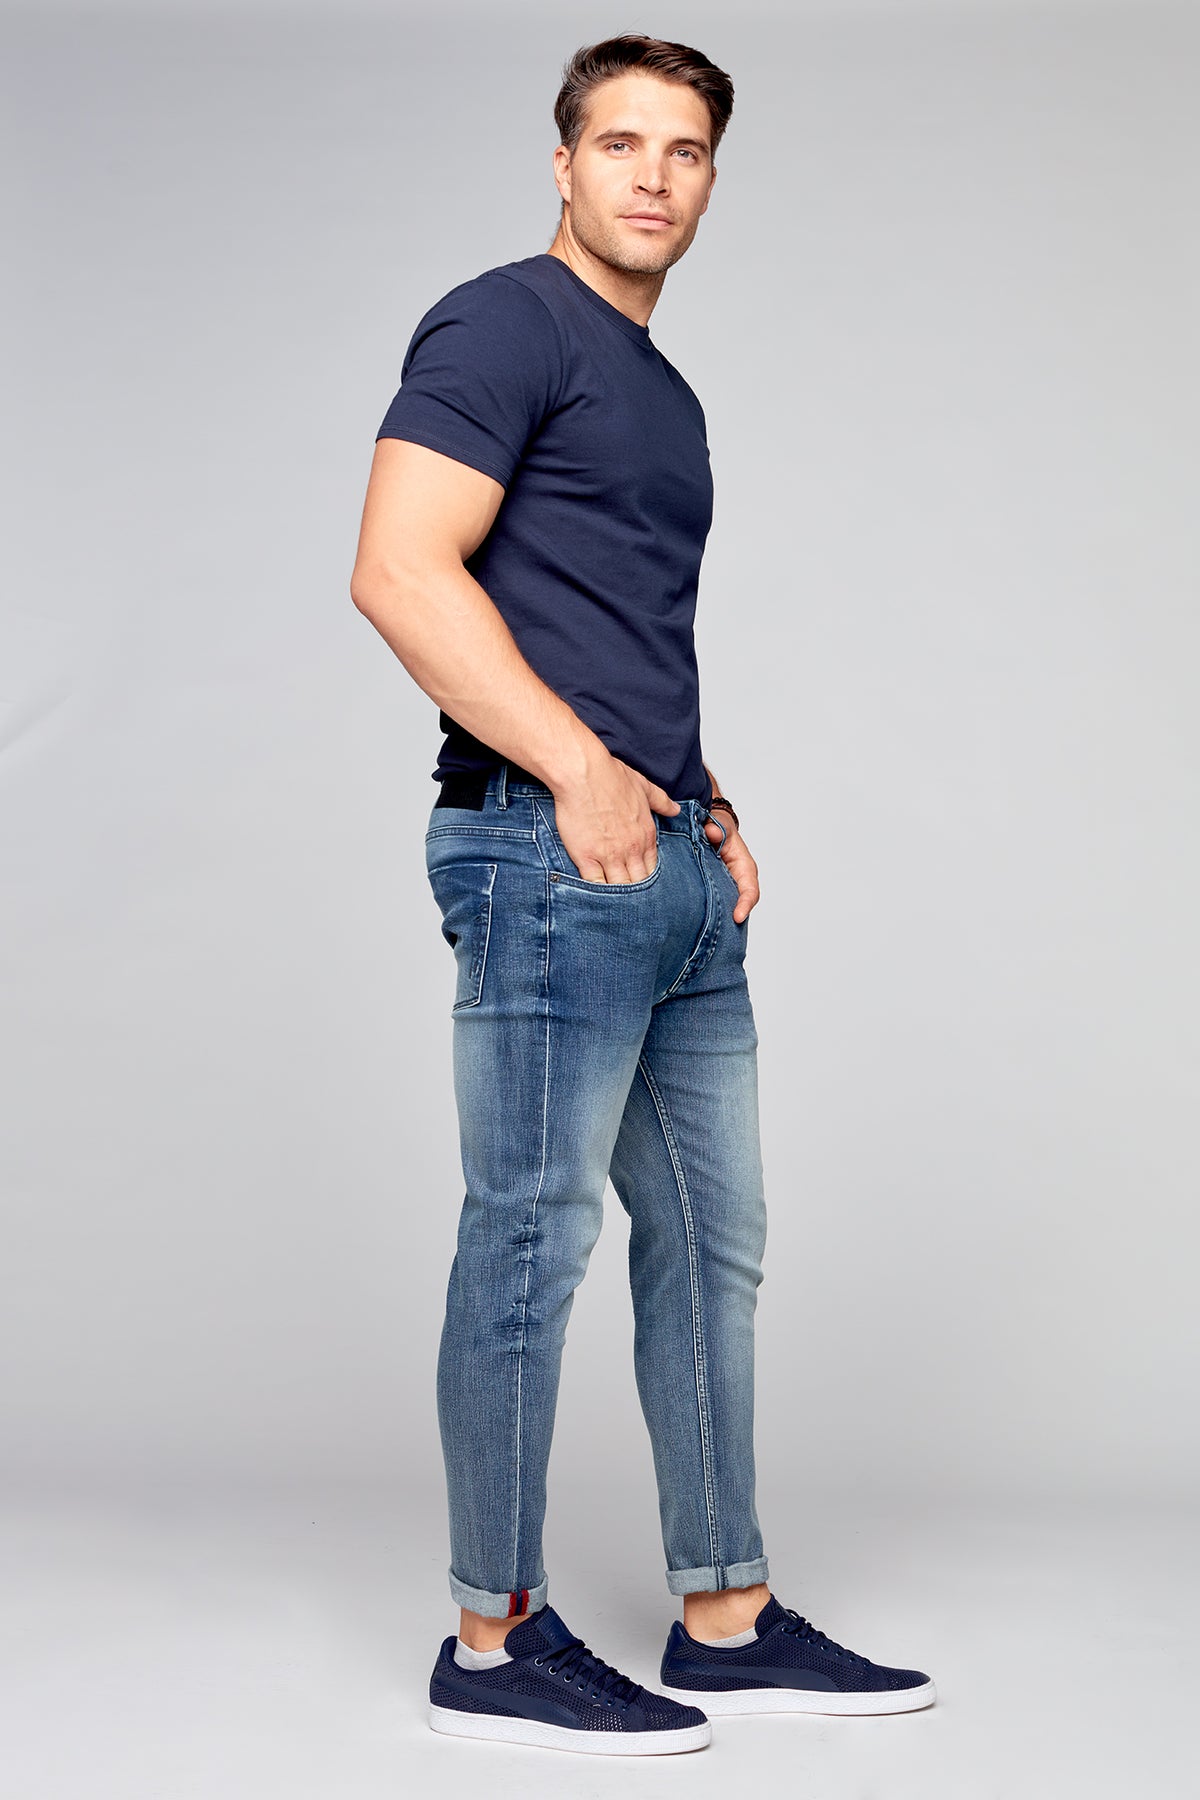 Relaxed Tapered Fit 5 Pocket Jeans - Vintage Light Blue Wash - DENIM SOCIETY™